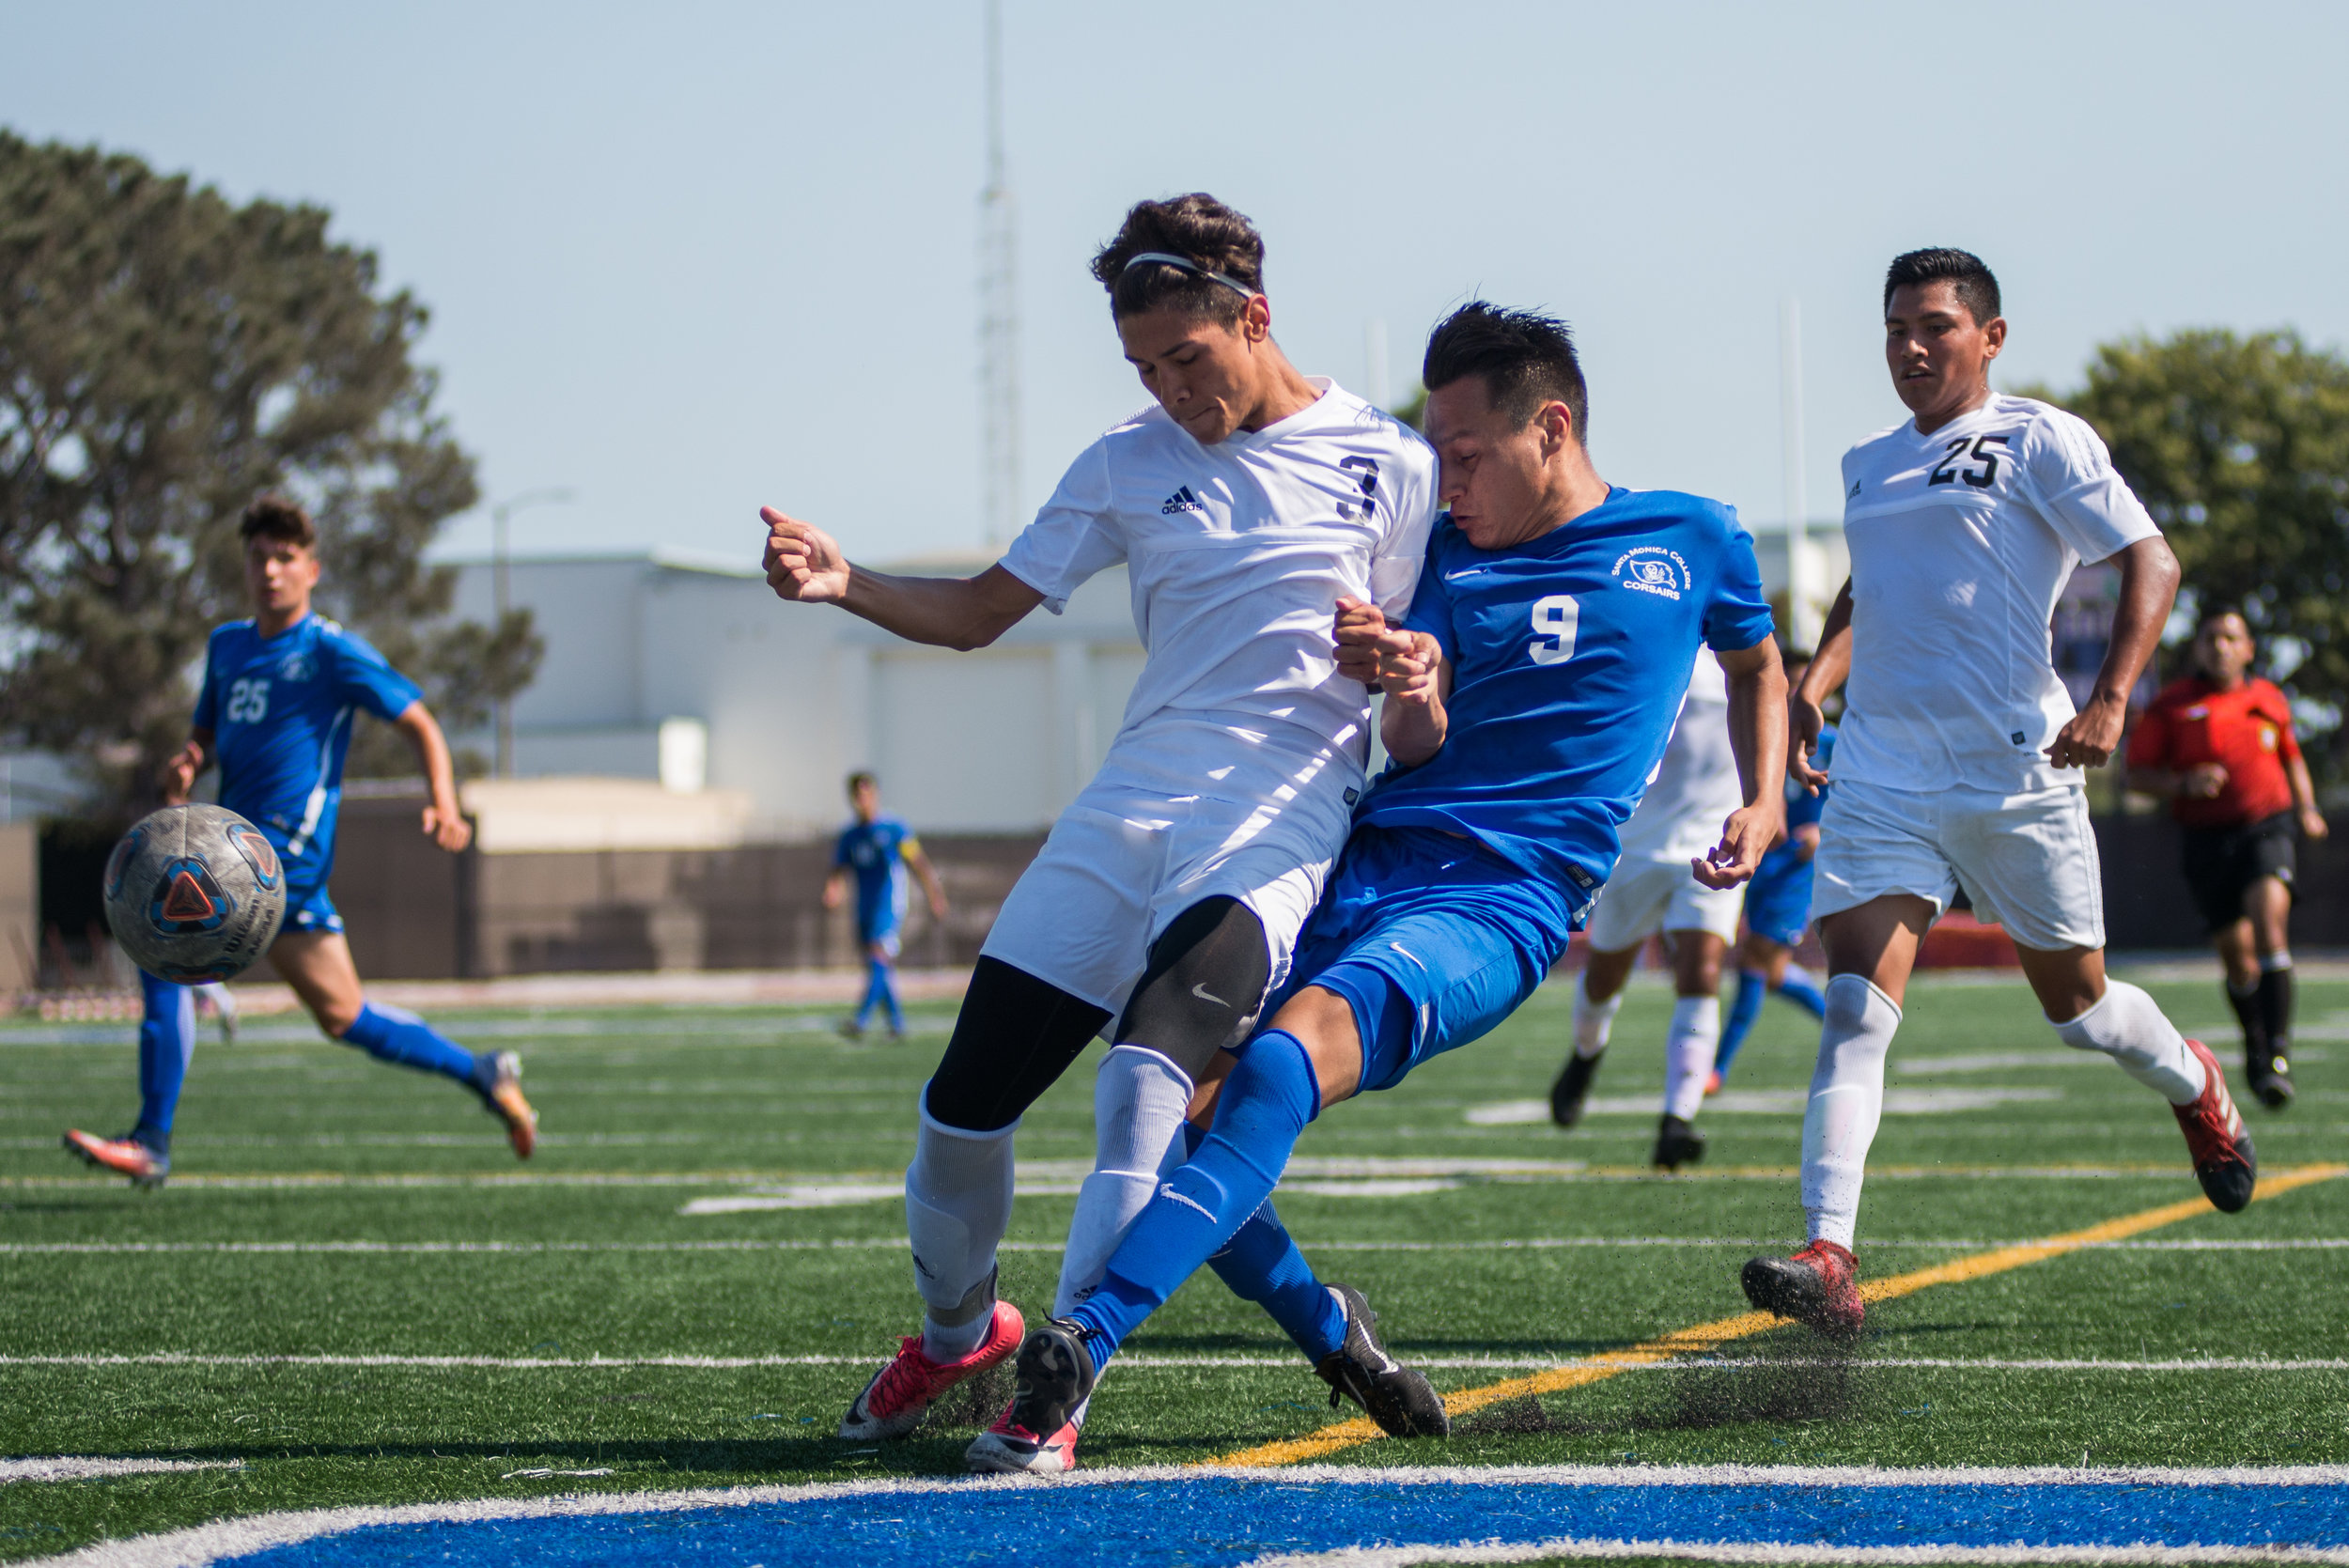  Santa Monica College Corsair Chris Negrete (9) (CTR) contests a pass against Citrus College Owl Jayson Yepez Chavez (3) (L) on Tuesday September 26, 2017 on the Corsair Field at Santa Monica College in Santa Monica, California. The Corsairs tied the